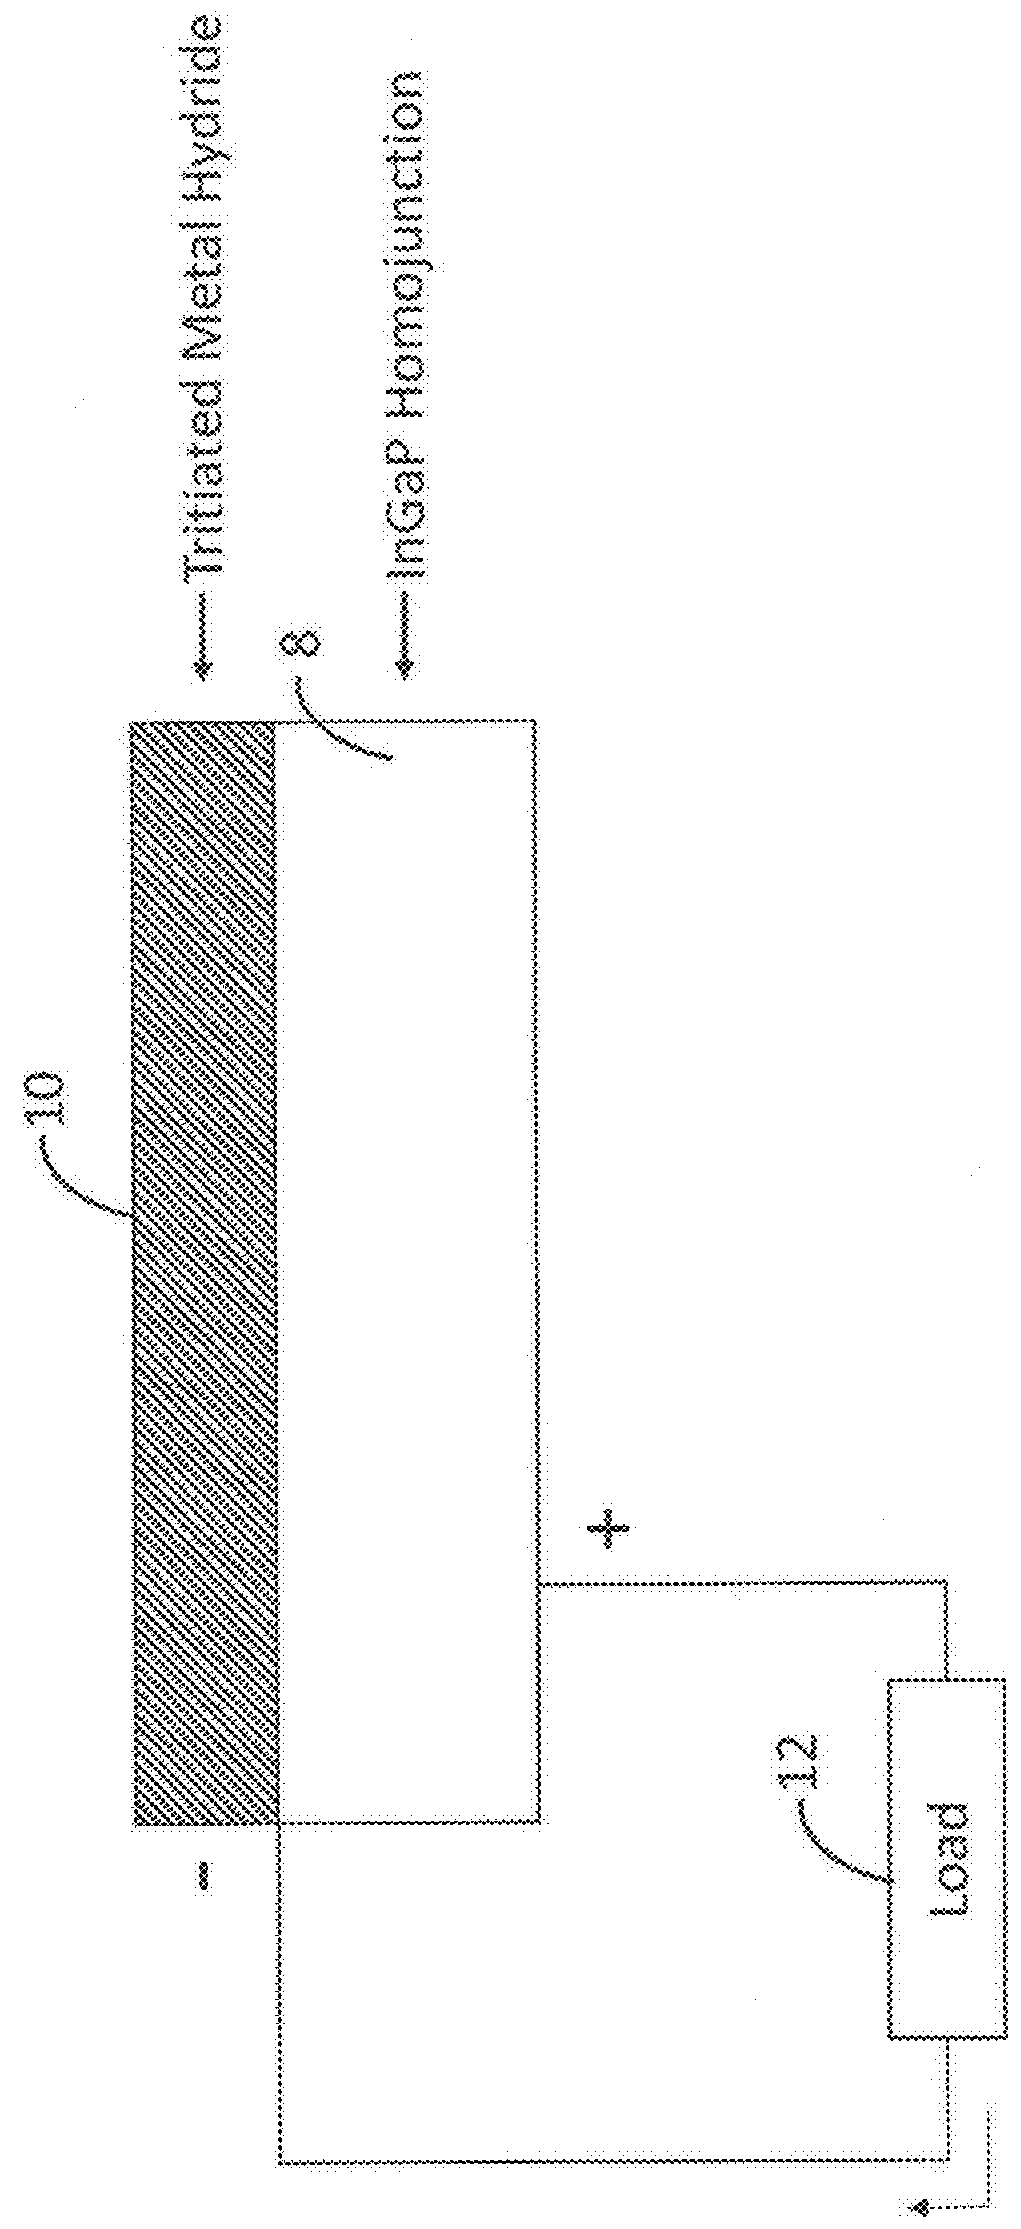 Semiconductor device for directly converting radioisotope emissions into electrical power